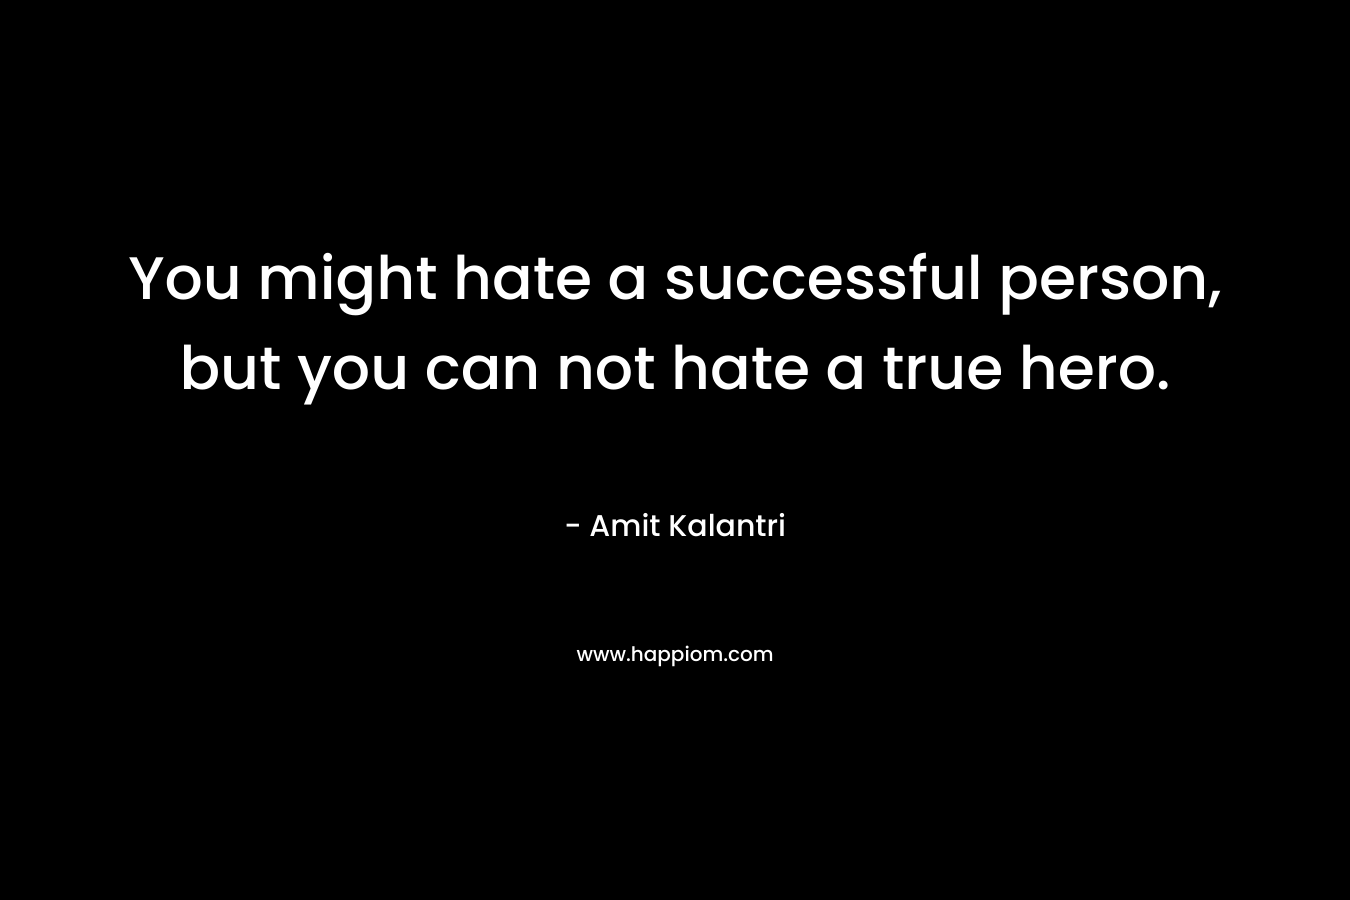 You might hate a successful person, but you can not hate a true hero.